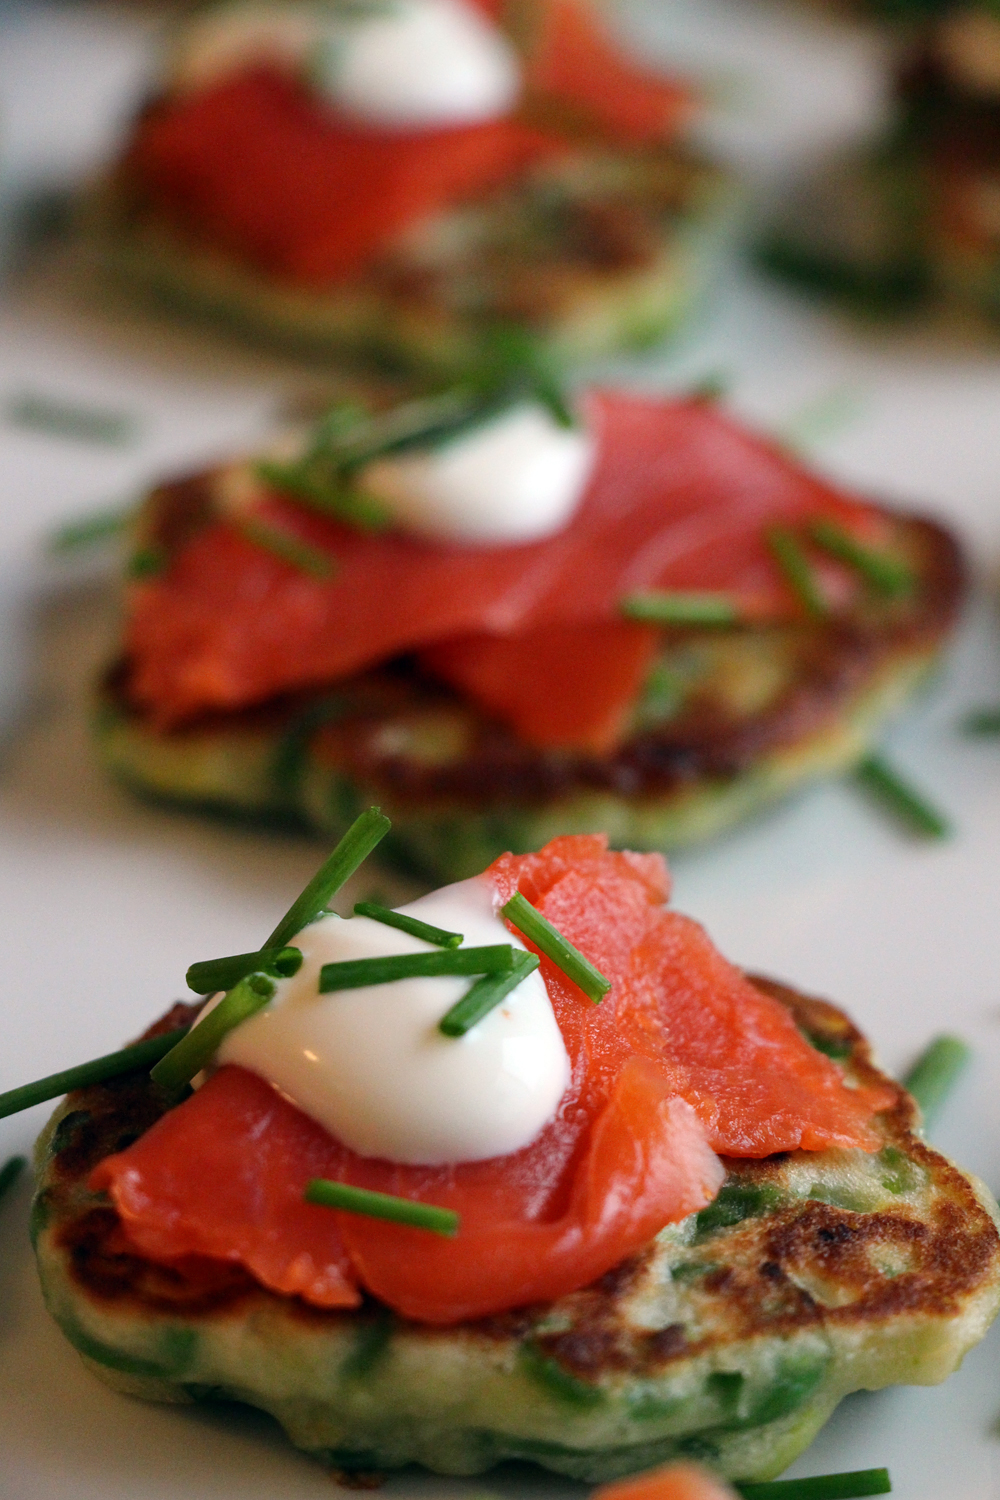 Sweet Pea Pancakes with Smoked Salmon and Crème Fraiche. Photo: Wendy Goodfriend